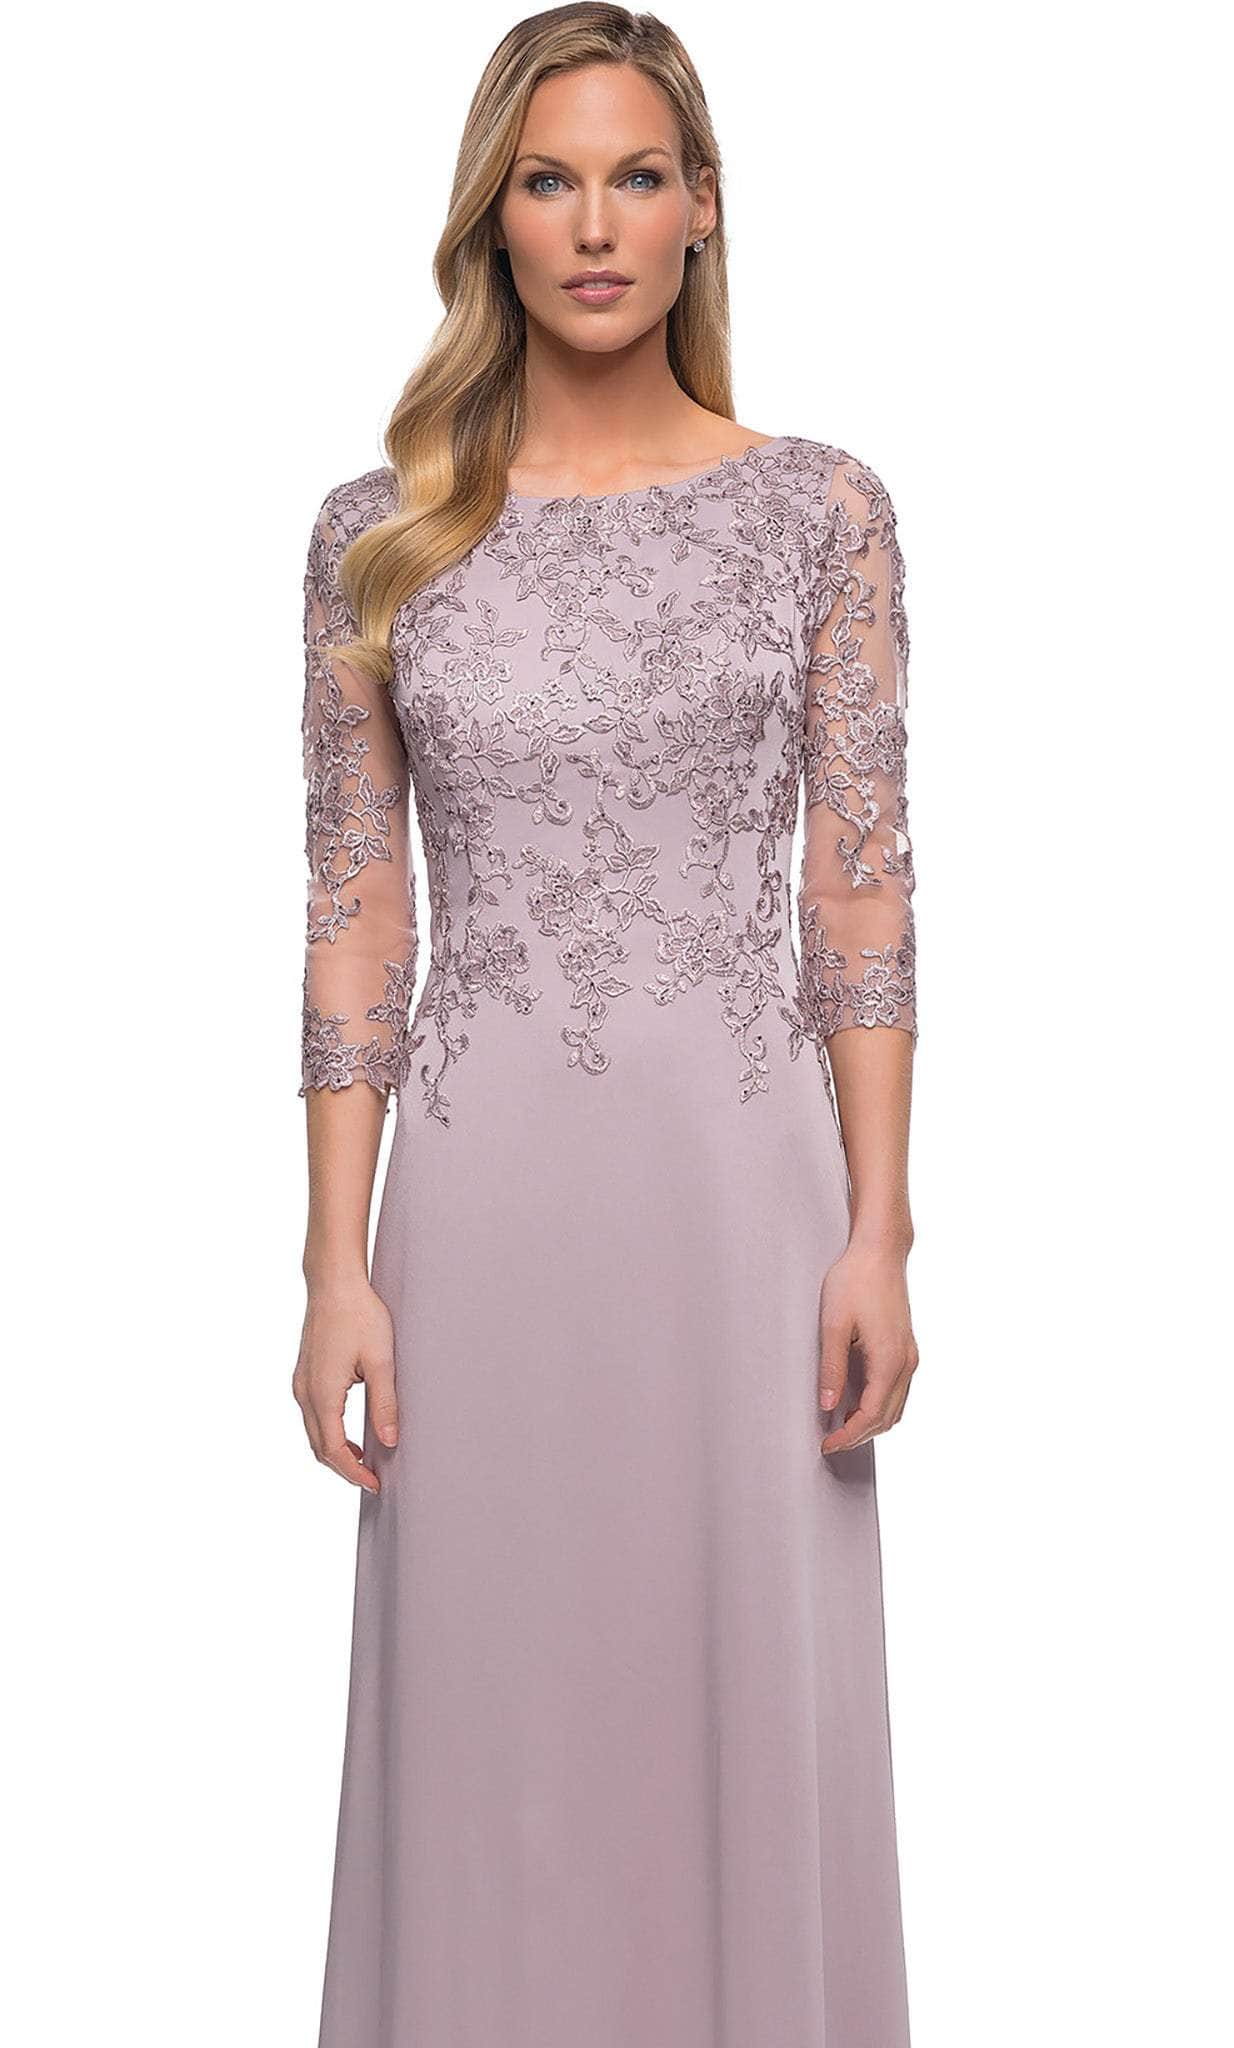 La Femme - 29251 Embroidered Soft Look A-line Gown Mother of the Bride Dresses